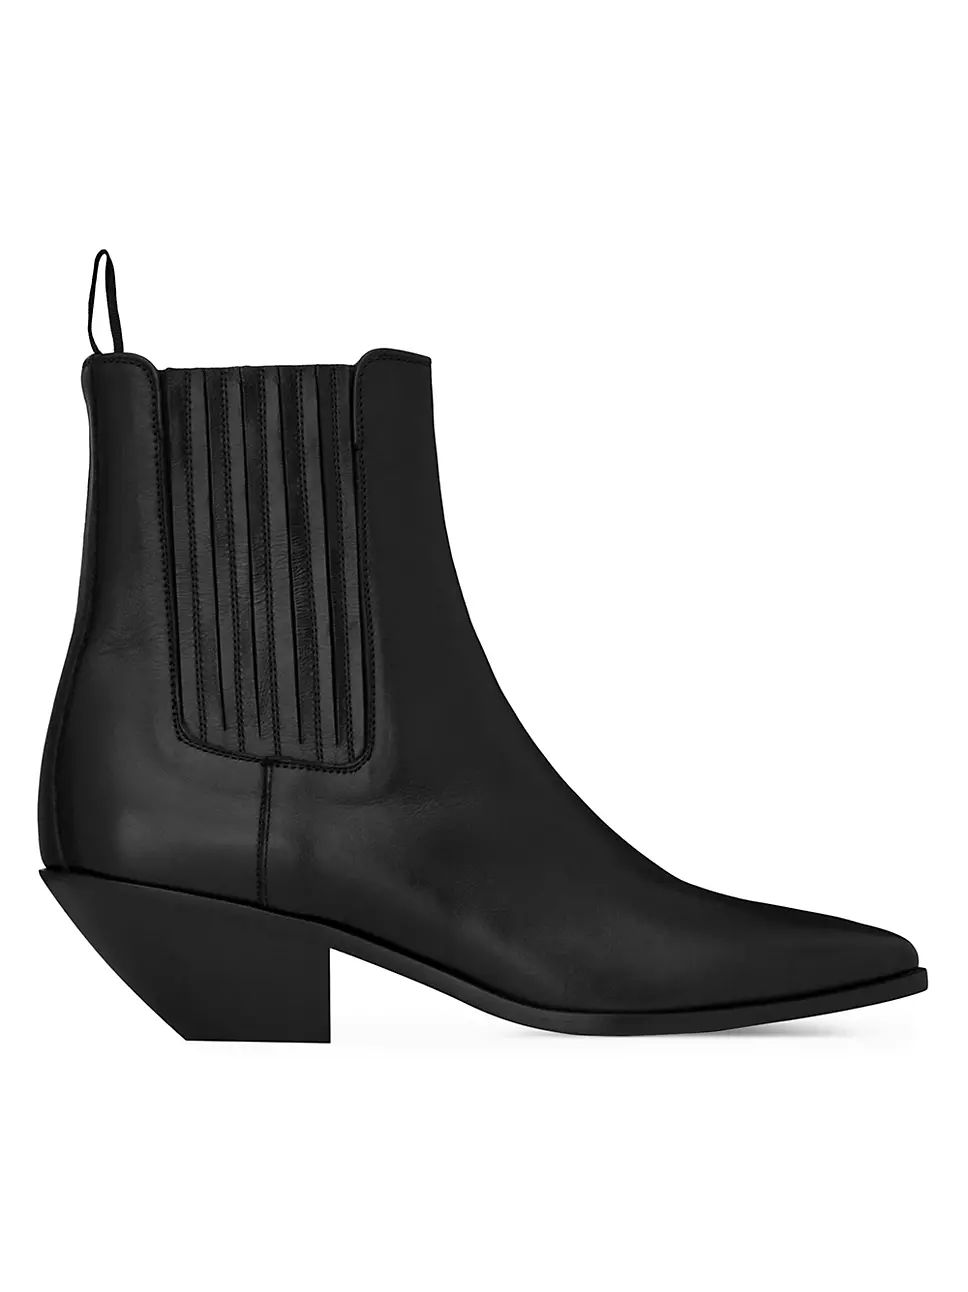 West Chelsea Boots in Smooth Leather | Saks Fifth Avenue